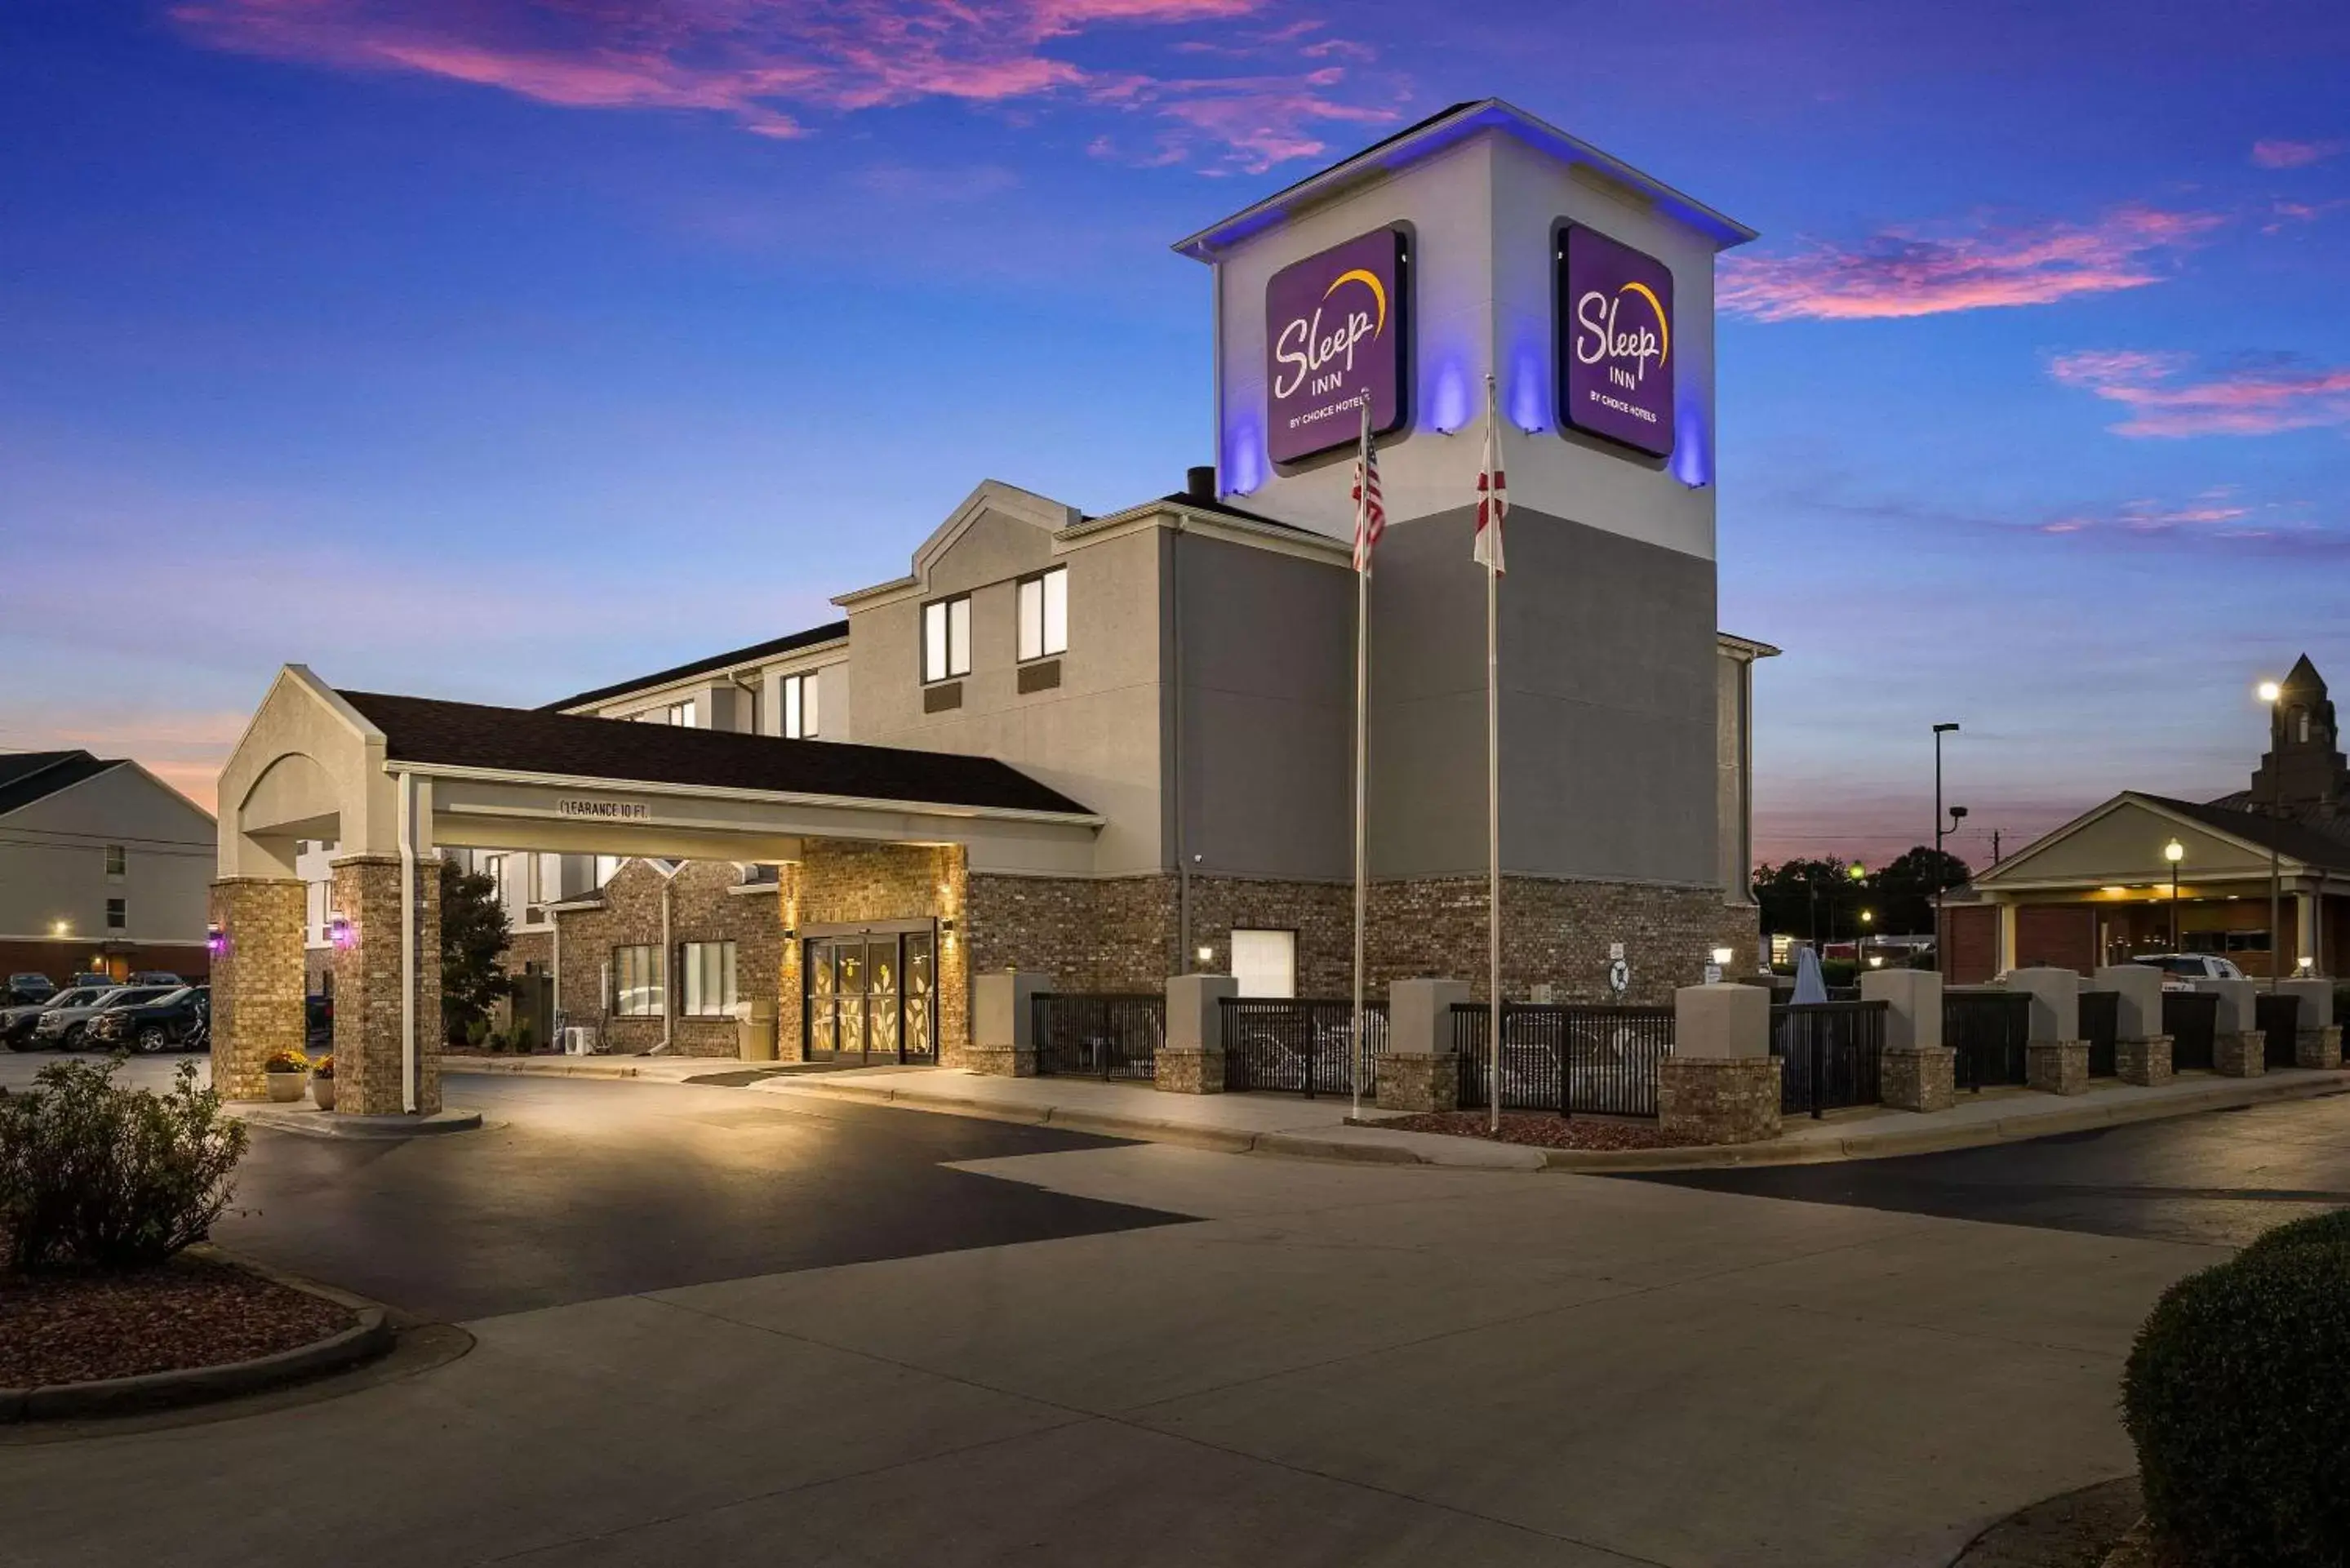 Off site, Property Building in Sleep Inn Oxford Anniston I-20